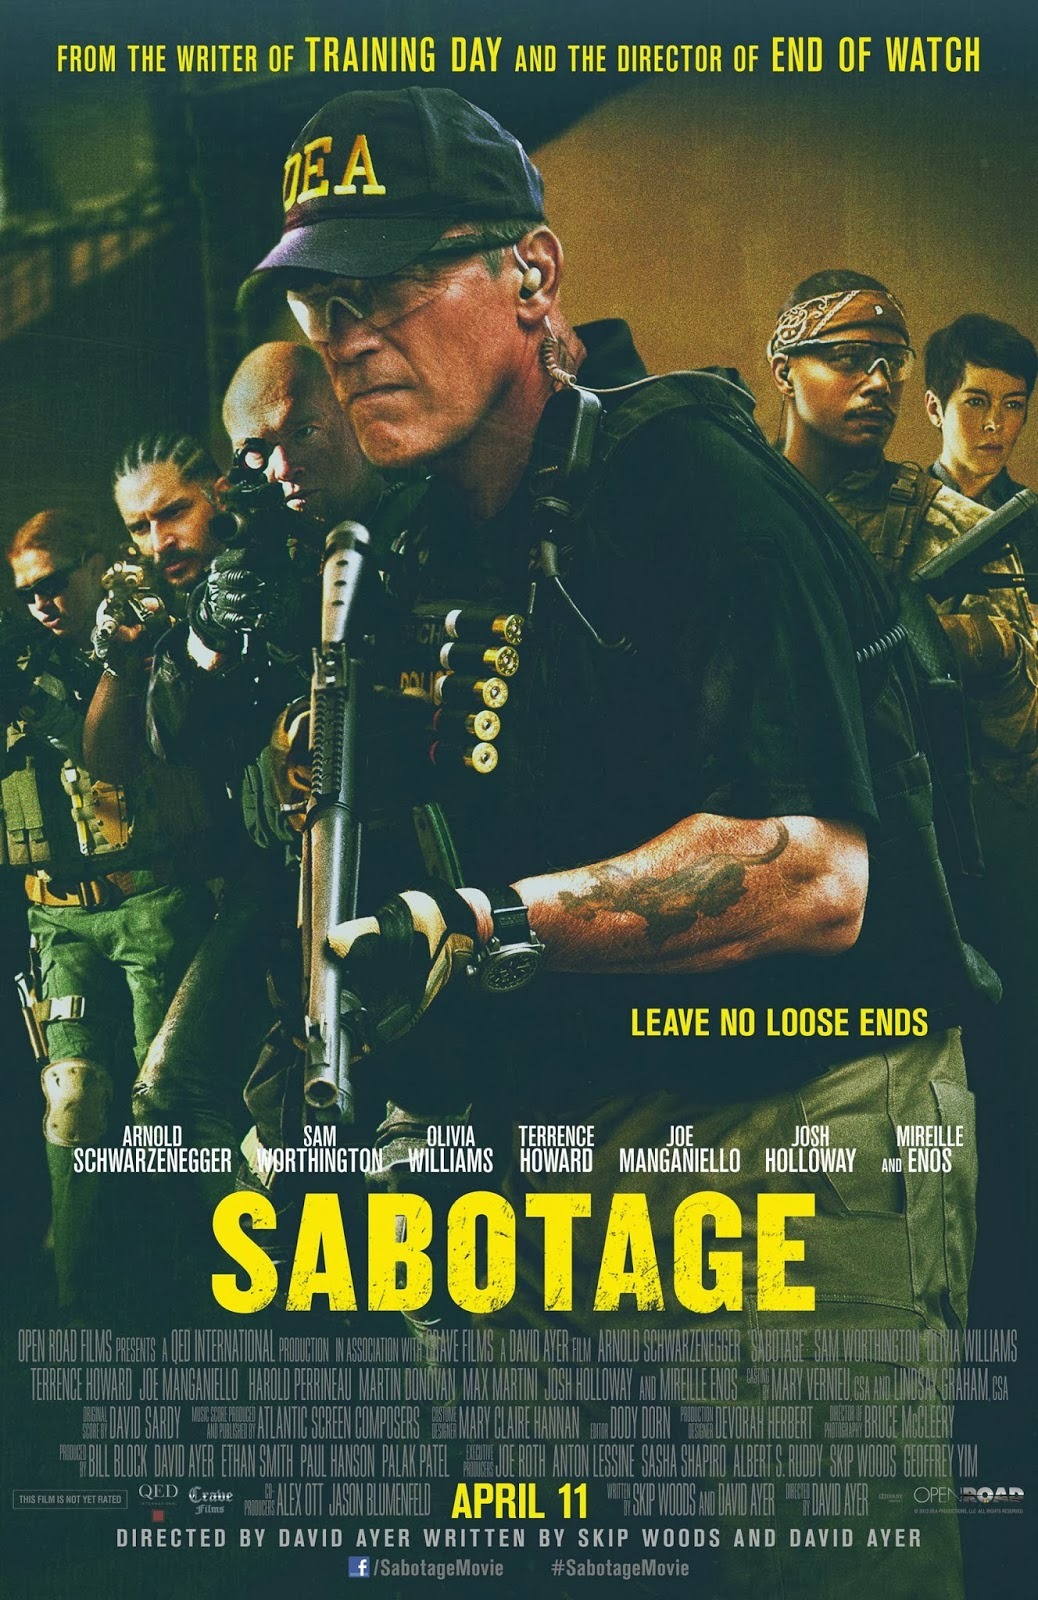                                       
Click here to ==» Watch Sabotage Online Free
Click here to ==»Watch Sabotage Online Free
Watch Sabotage Online Free, Members of an elite DEA task force find themselves being taken down one by one after they rob a drug cartel safe house. David Ayer usually directs from his own screenplays, Sabotage Movie but here he’s a hired gun for a fledgling movie studio looking to score a hit with an action-heavy spin on the classic Agatha Christie story. Sabotage Movie 2014 The premise seamlessly fits with the.
The scene takes place at Training Site Bravo of the Special Operations Team of the Drug Enforcement Administration, but you’d only know that from the sign outside — the crew inside looks more like members of a motorcycle gang than DEA agents, complete with nicknames like “Sugar” (Terrence Howard).
This tense moment focuses on “Grinder” (Joe Manganiello), who’s none too happy about some sort of news the team has just received — something that no doubt puts them in grave danger, as evidenced by Arnold’s earlier line. watch sabotage movie online free.
The plot of the film involves these “Expendables”-like operatives getting picked off one by one after they bust a cartel safe house, which results in $10 million in drug money going missing; Ayer certainly seems at home with stories of morally compromised law enforcers, having explored this theme in his scripts for “Training Day” (2001), “The Fast and the Furious” (2001), “Dark Blue” (2002) and, to some extent, “End of Watch.”
Click here to ==» Watch Sabotage Online Free
Click here to ==»Watch Sabotage Online Free